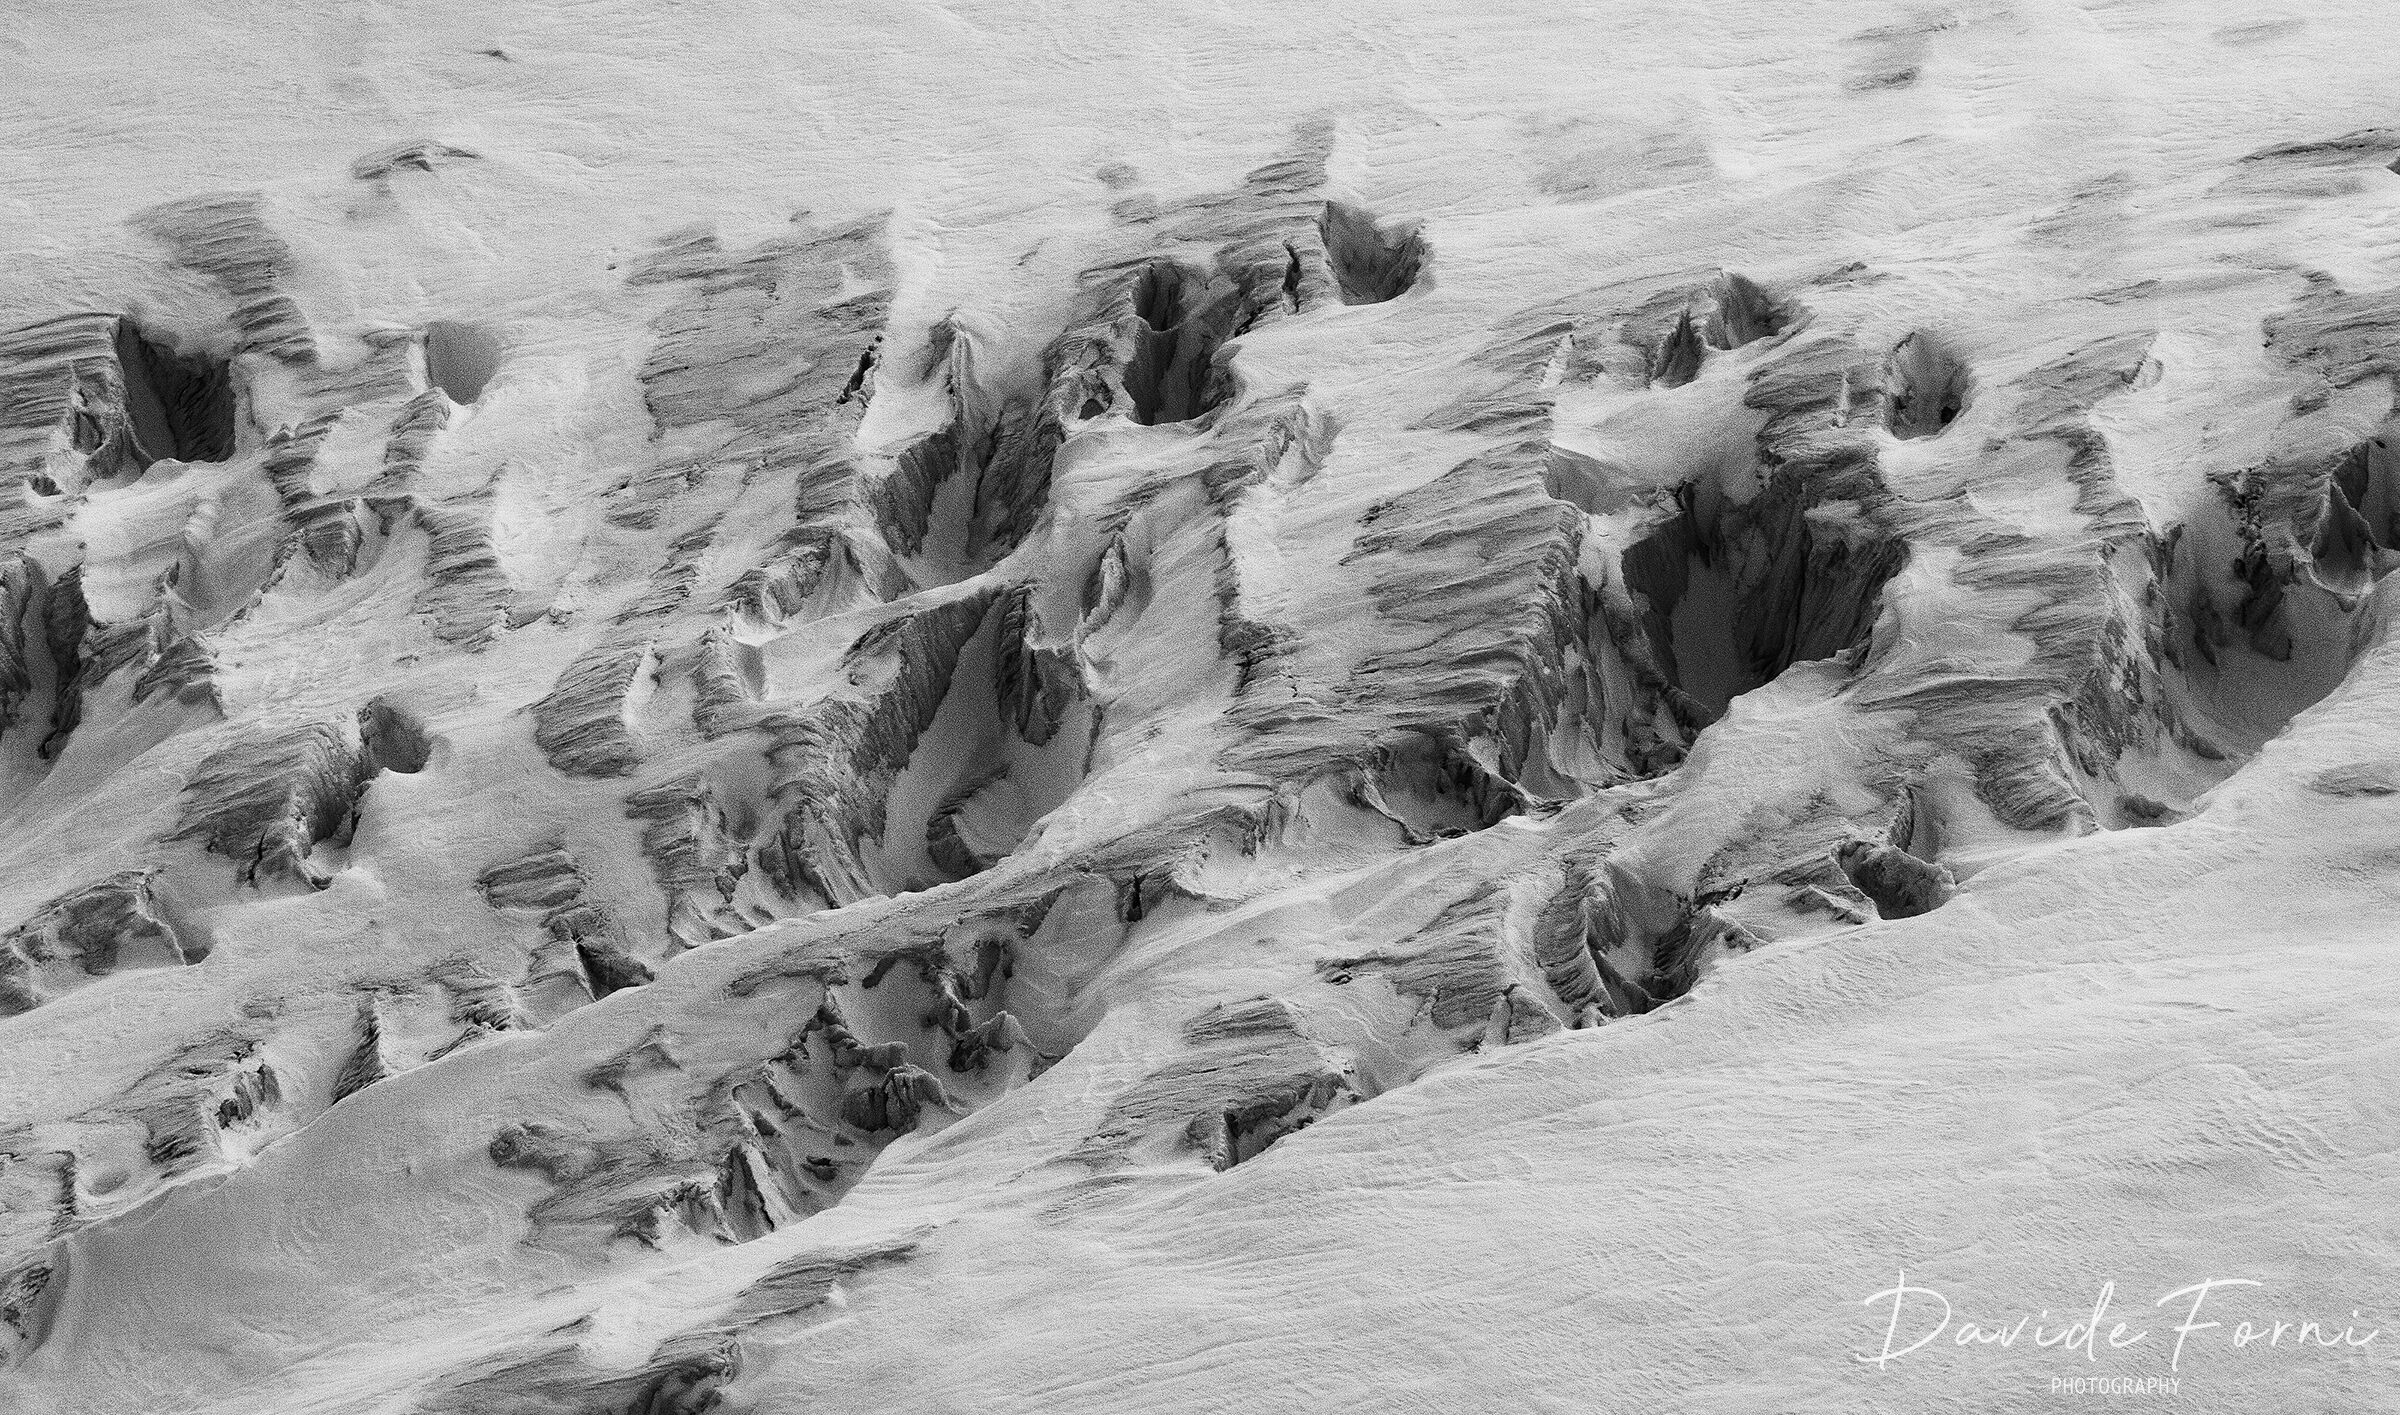 Shadows in a white sea... crevasses on the Aletsch...